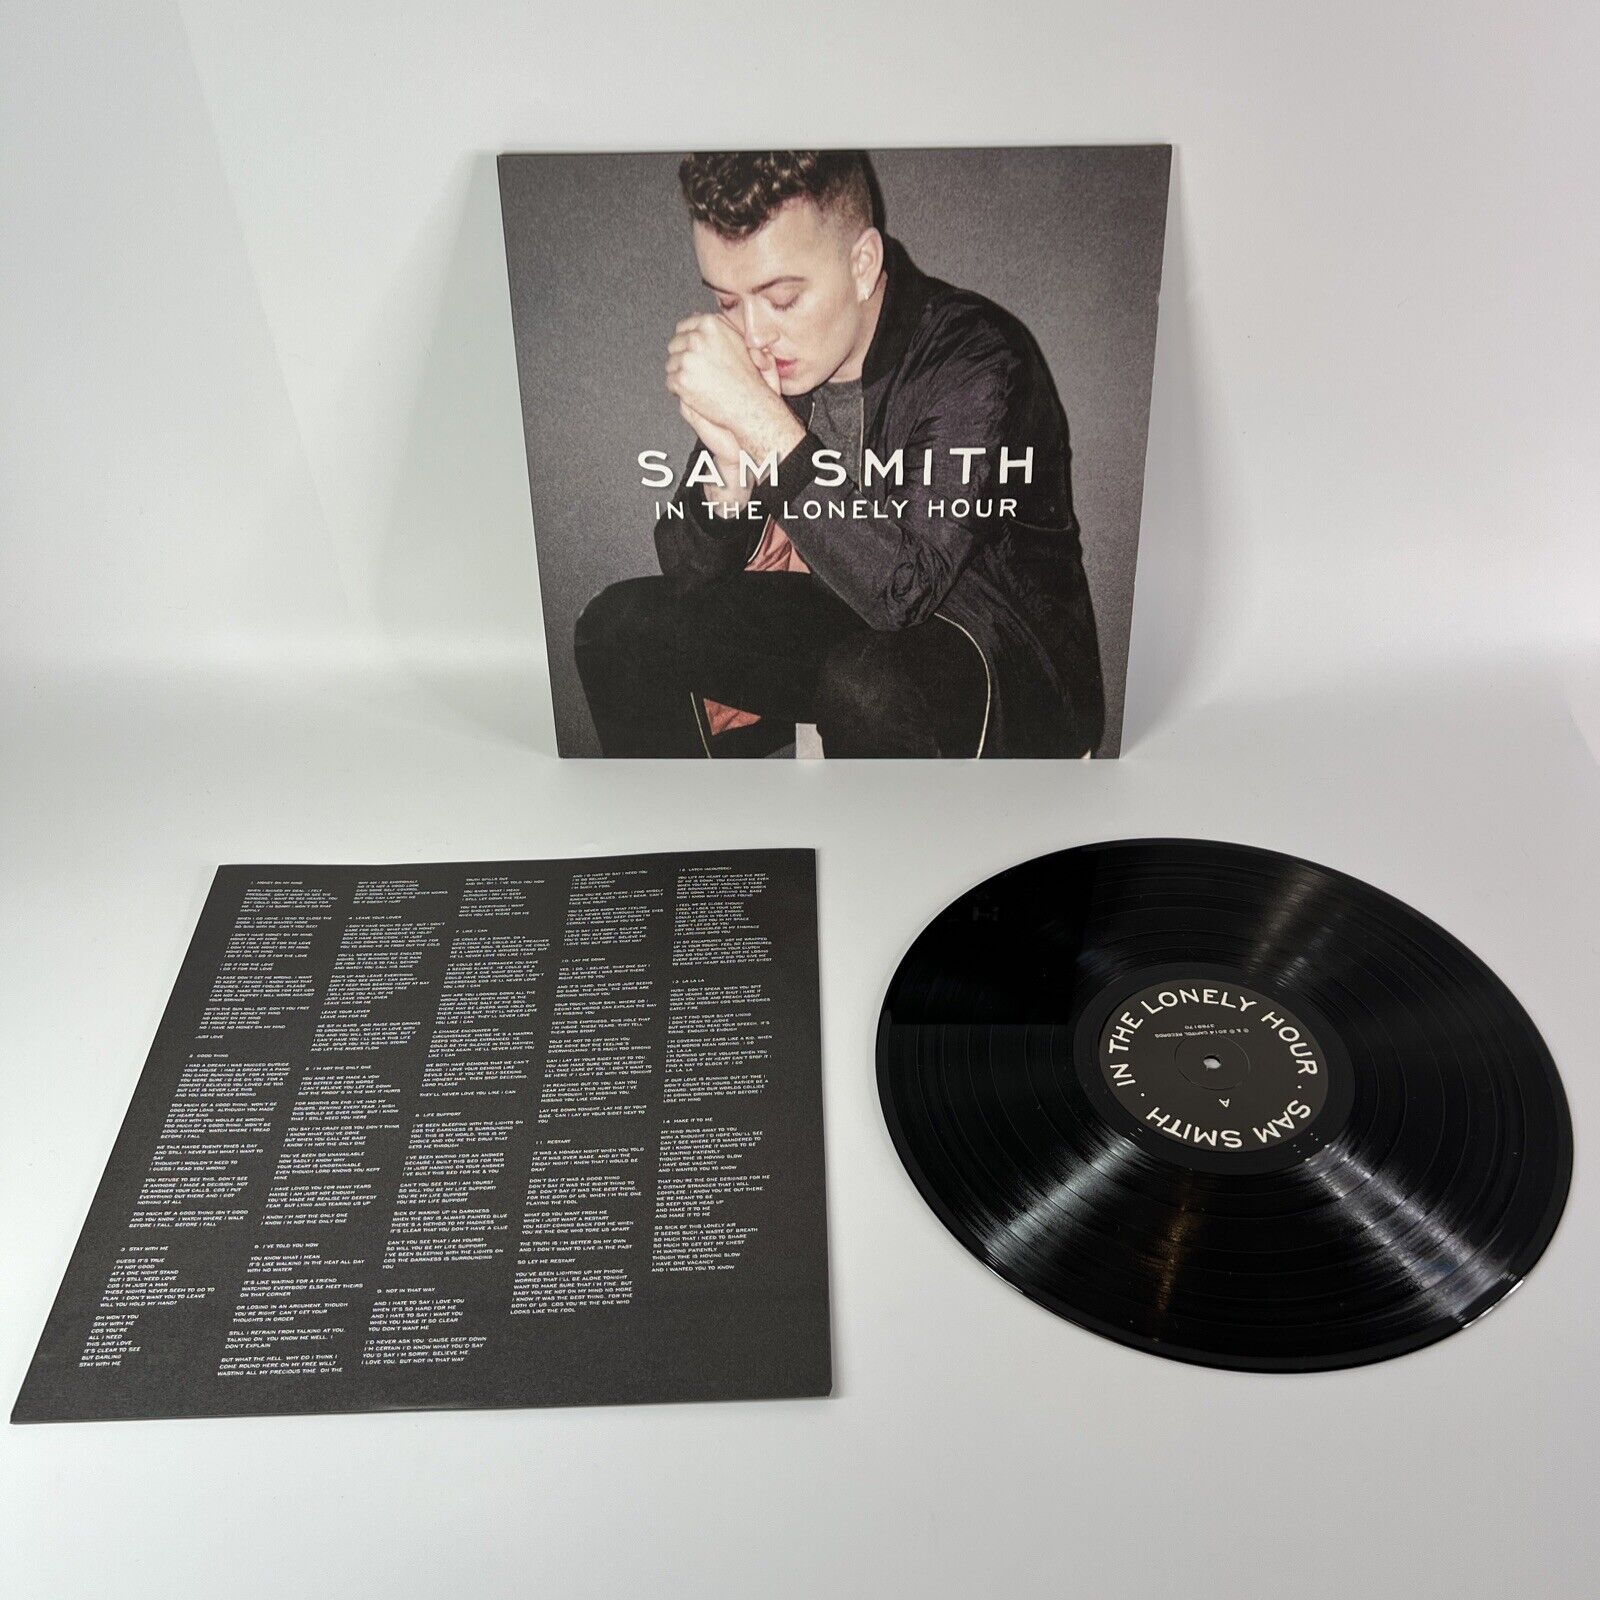 Sam Smith: In The Lonely Hour pre-owned vinyl LP Capitol Records 2014